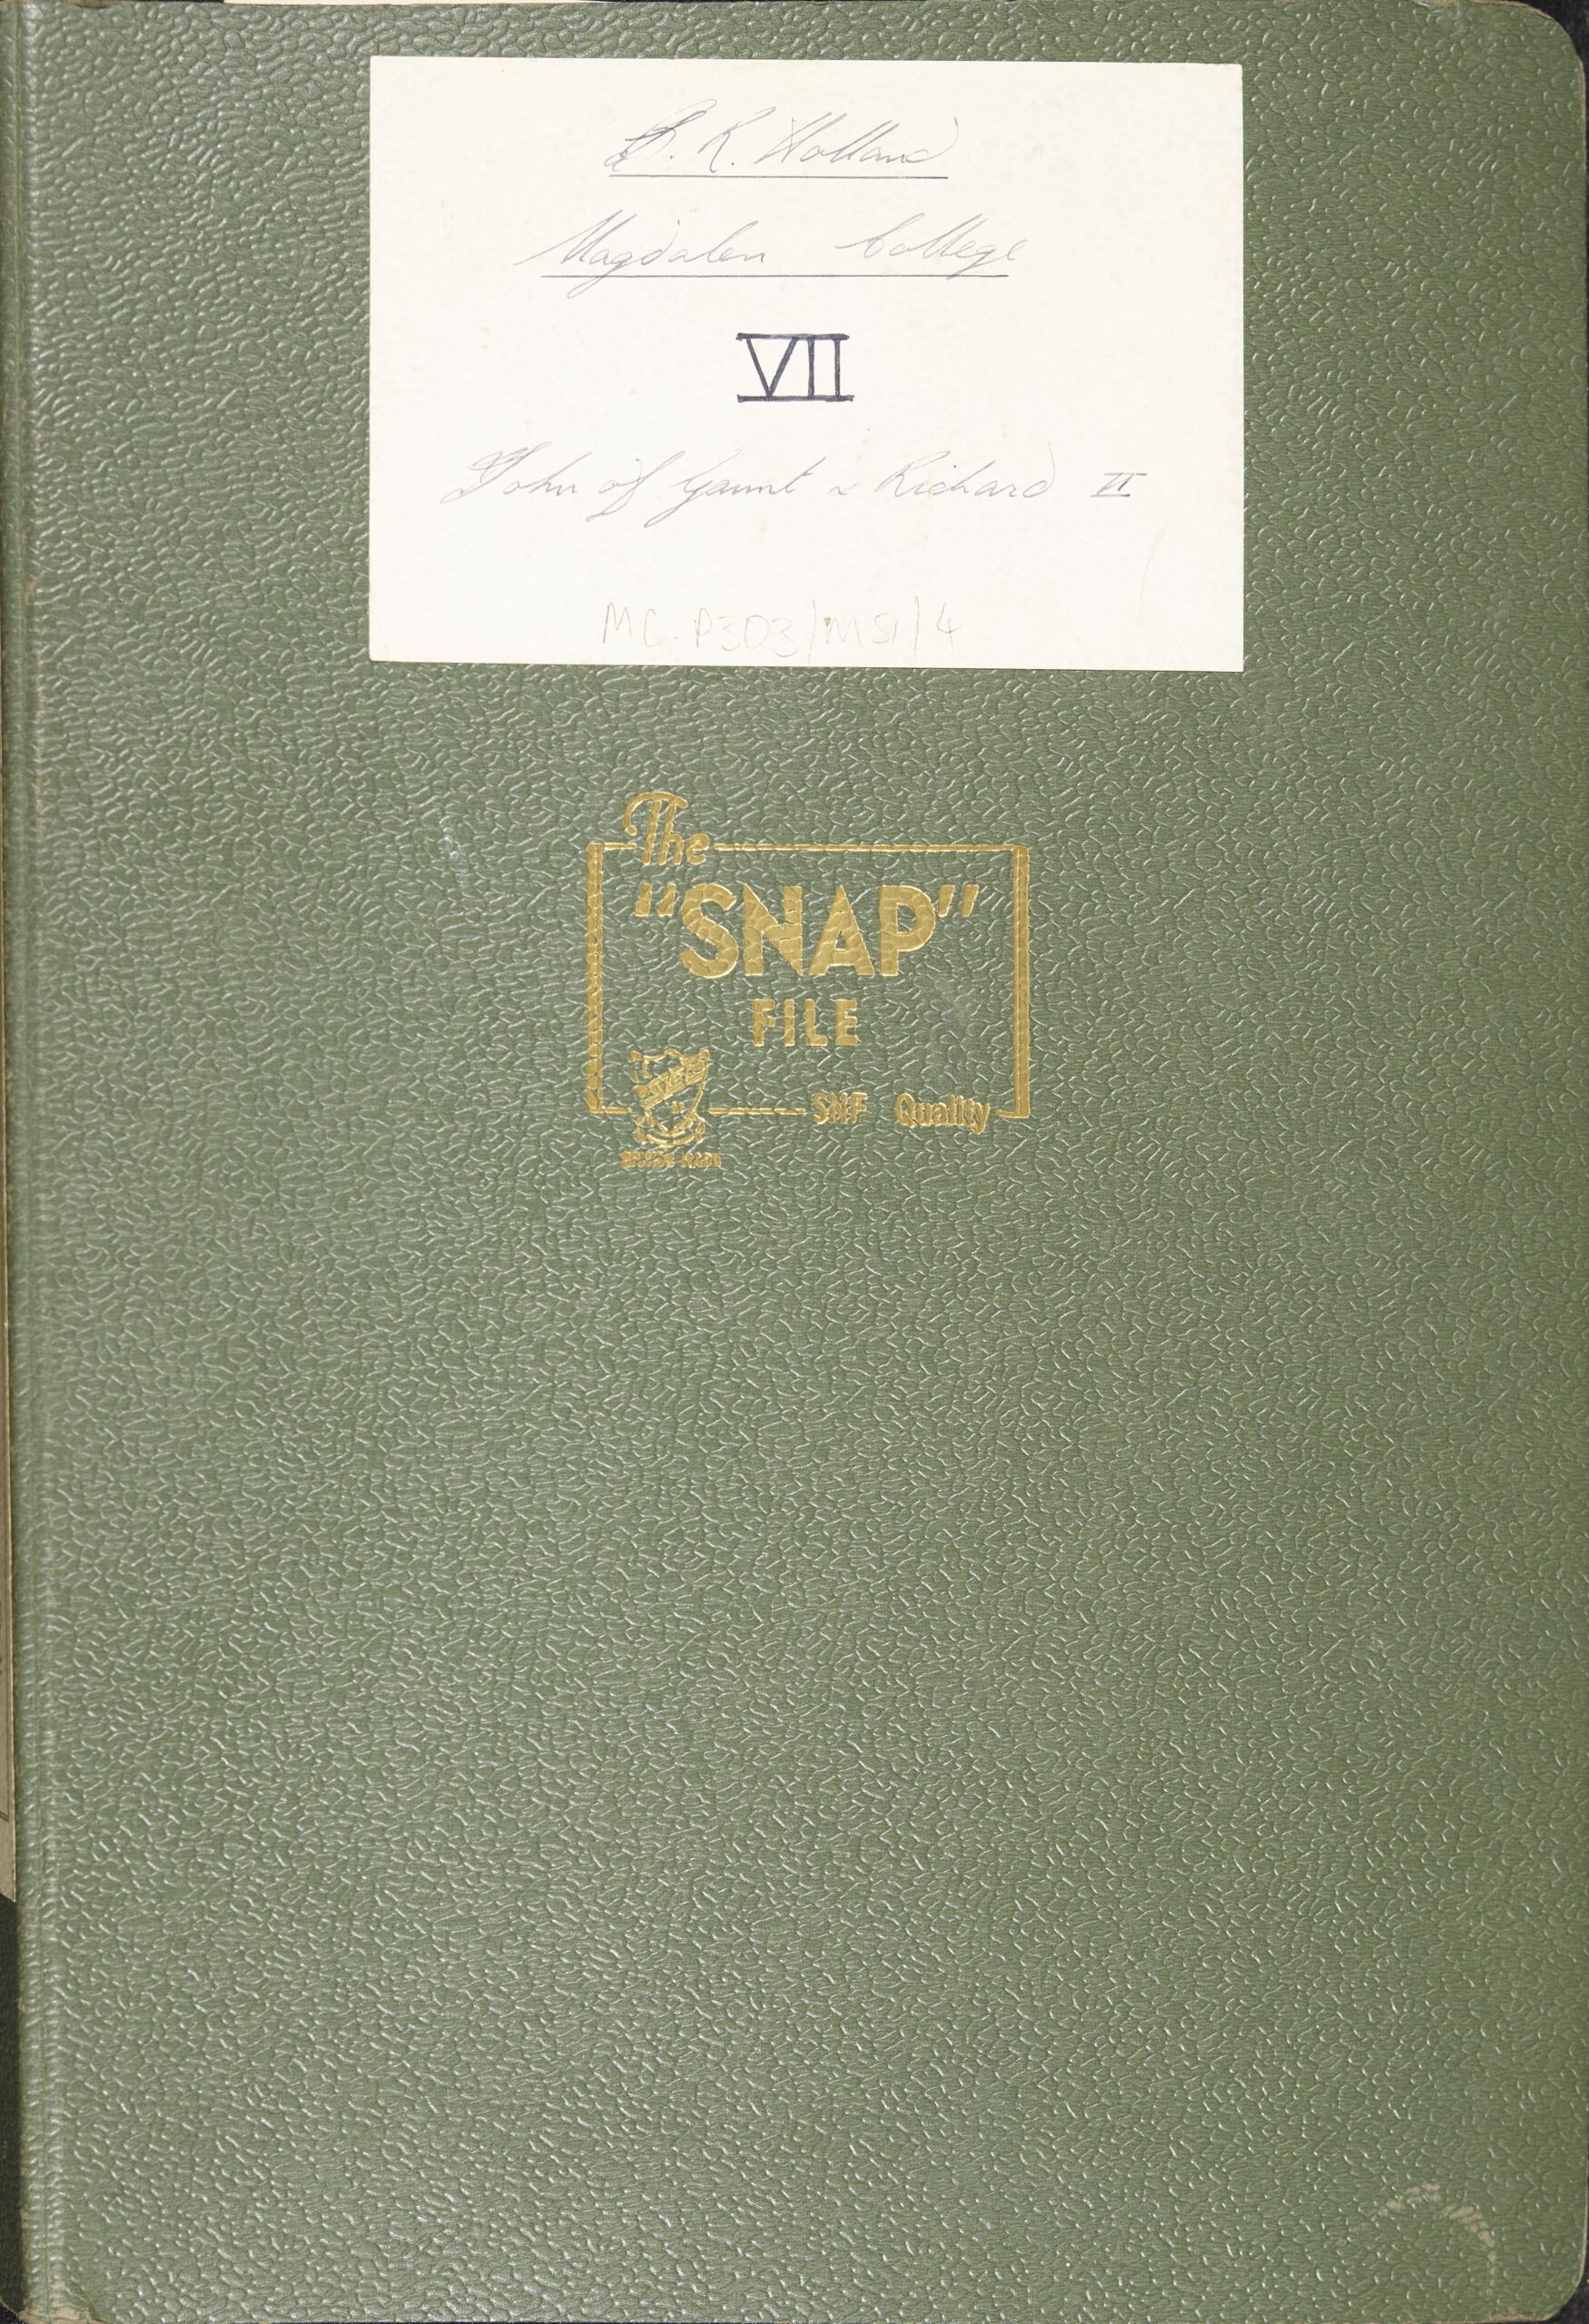 Green A4-sized file (branded 'The "SNAP" FILE'), with handwritten label "R. Holland Magdalen College VII John of Gaunt & Richard II